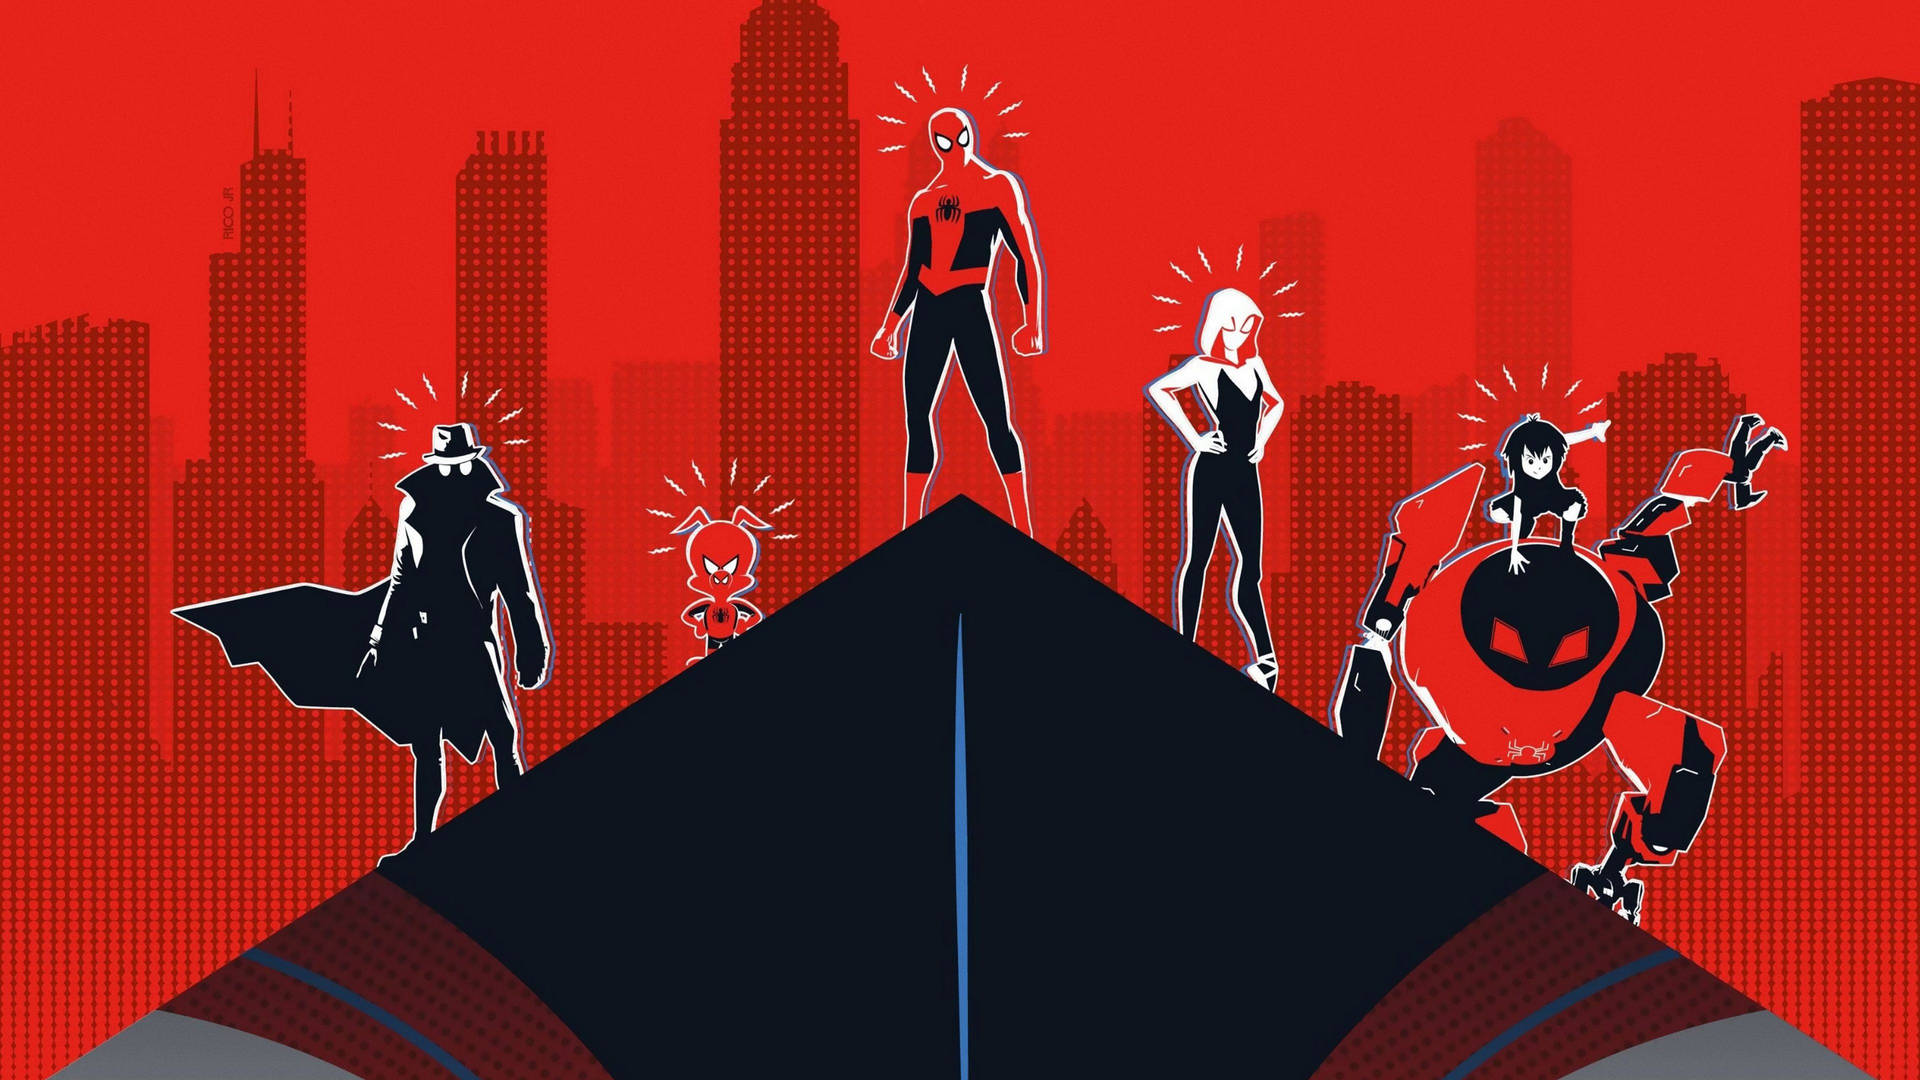 Free Spider Man Into The Spider Verse Wallpaper Downloads, [100+] Spider Man  Into The Spider Verse Wallpapers for FREE 